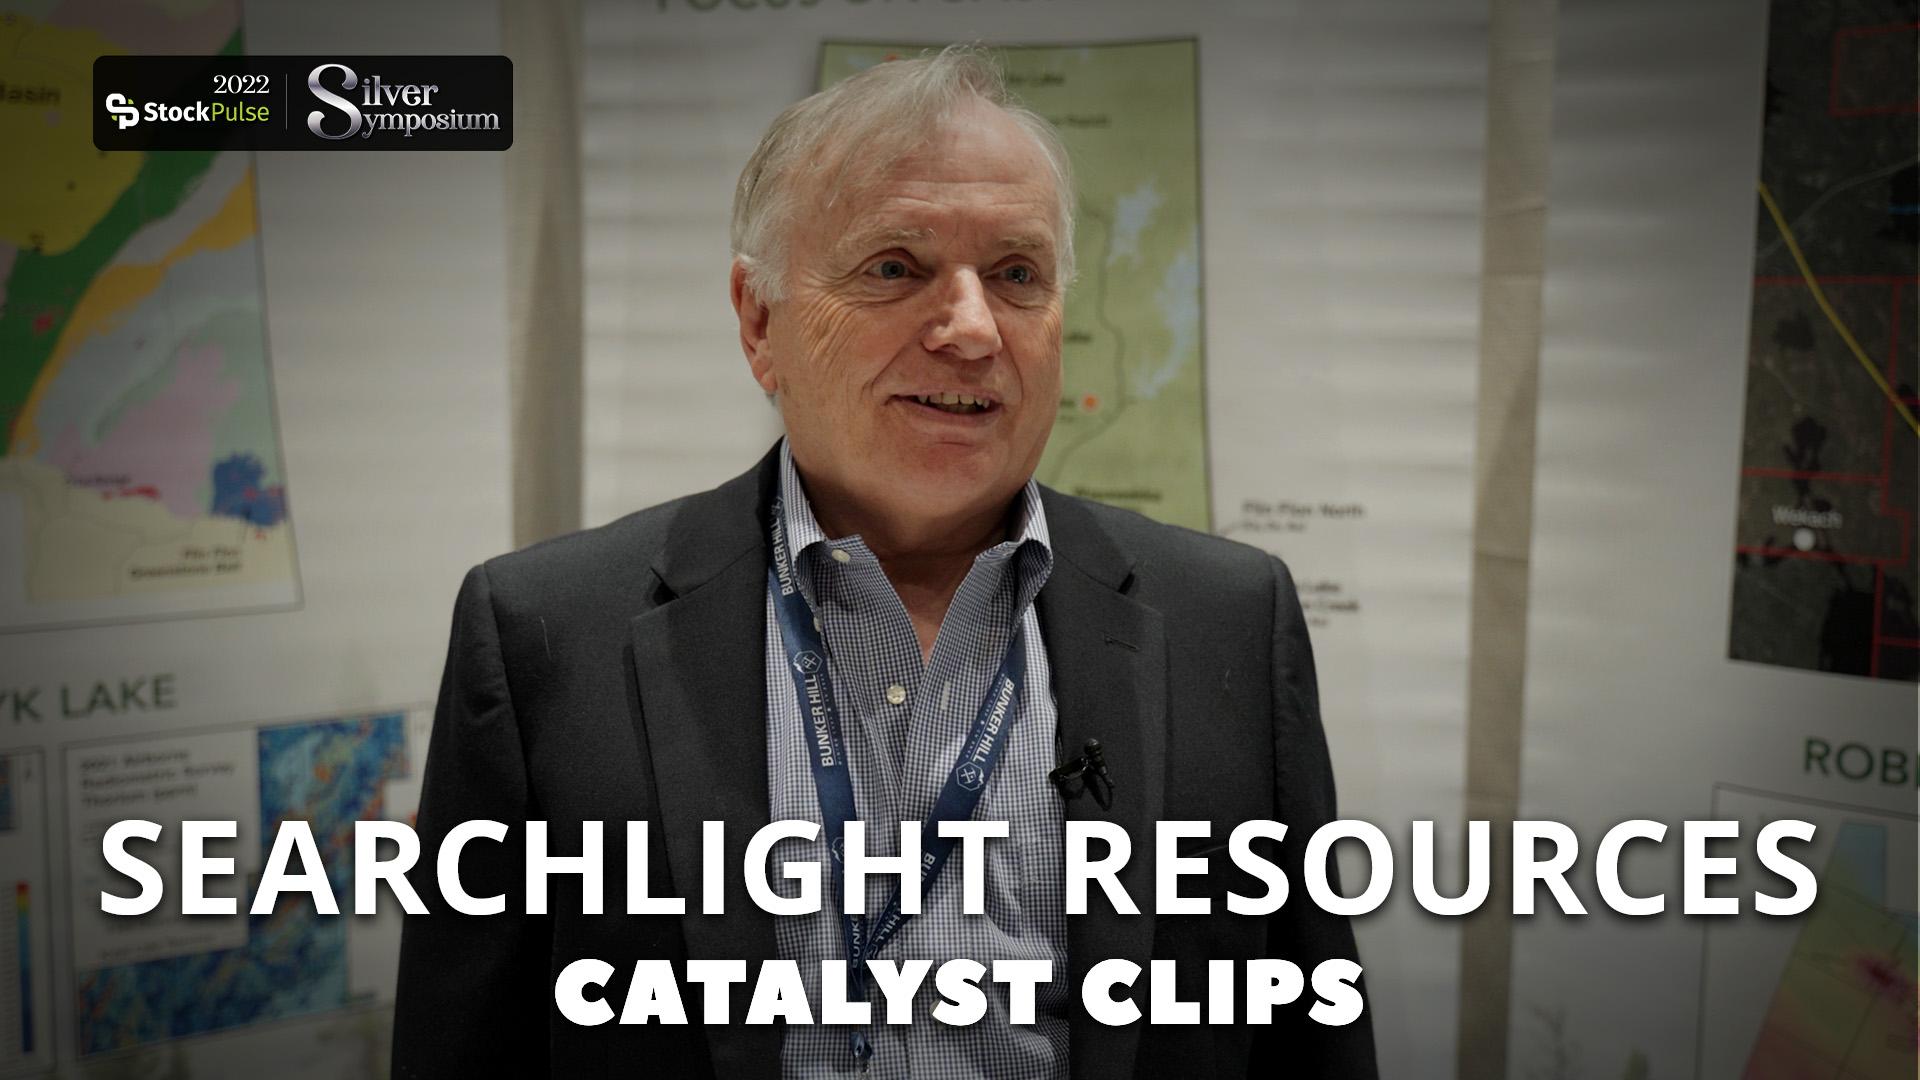 Catalyst Clips | Alf Stewart of Searchlight Resources